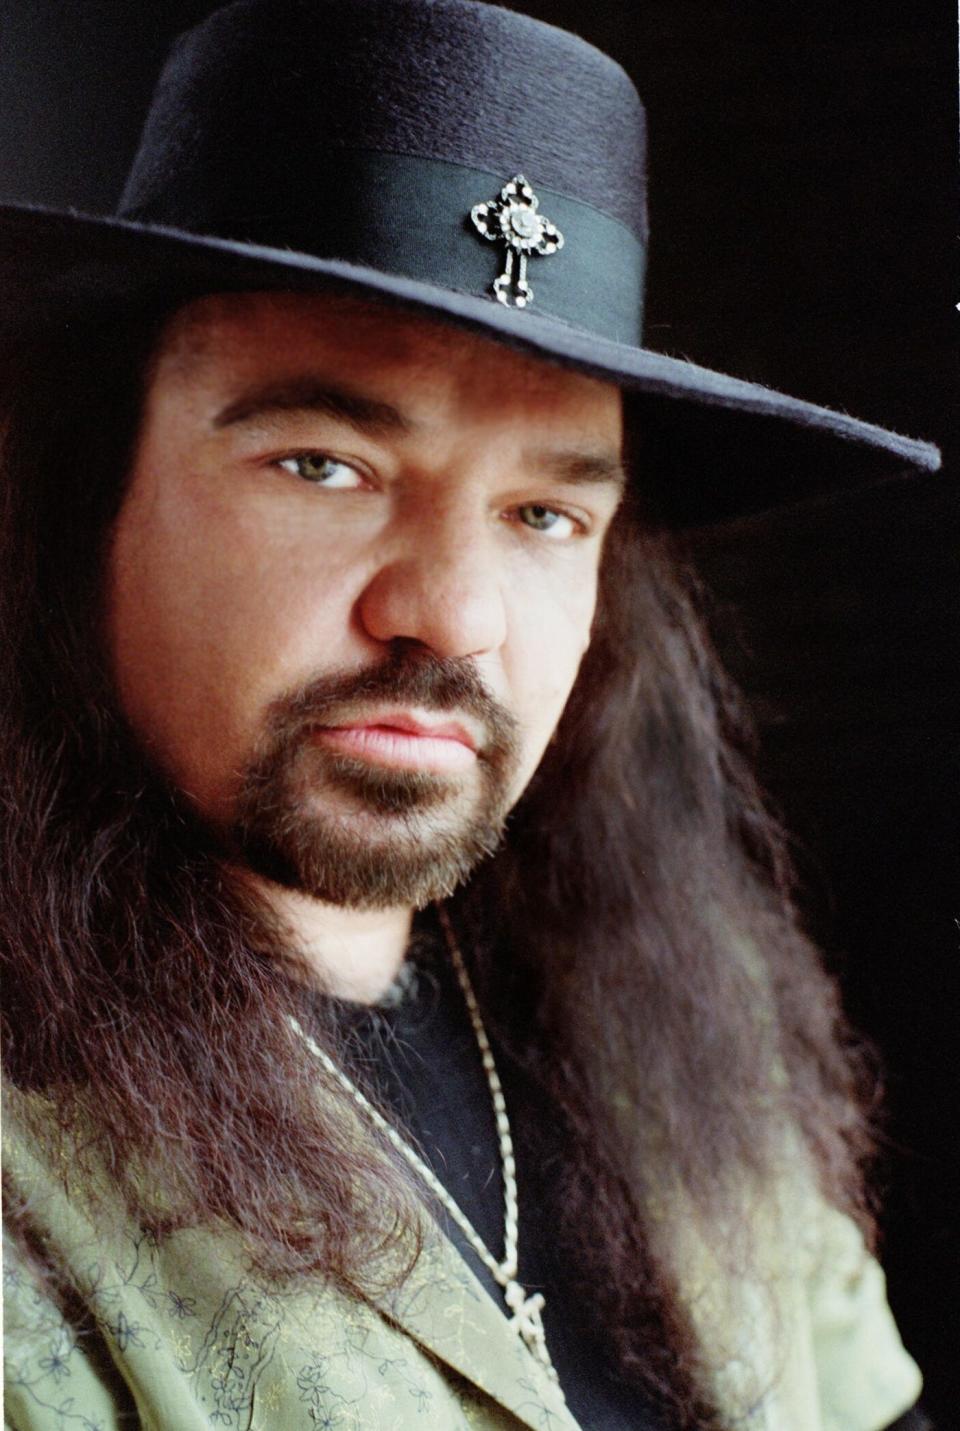 The band posted a statement confirming Rossington's death on its verified Facebook account. "It is with our deepest sympathy and sadness that we have to advise, that we lost our brother, friend, family member, songwriter and guitarist, Gary Rossington, today," the statement said.